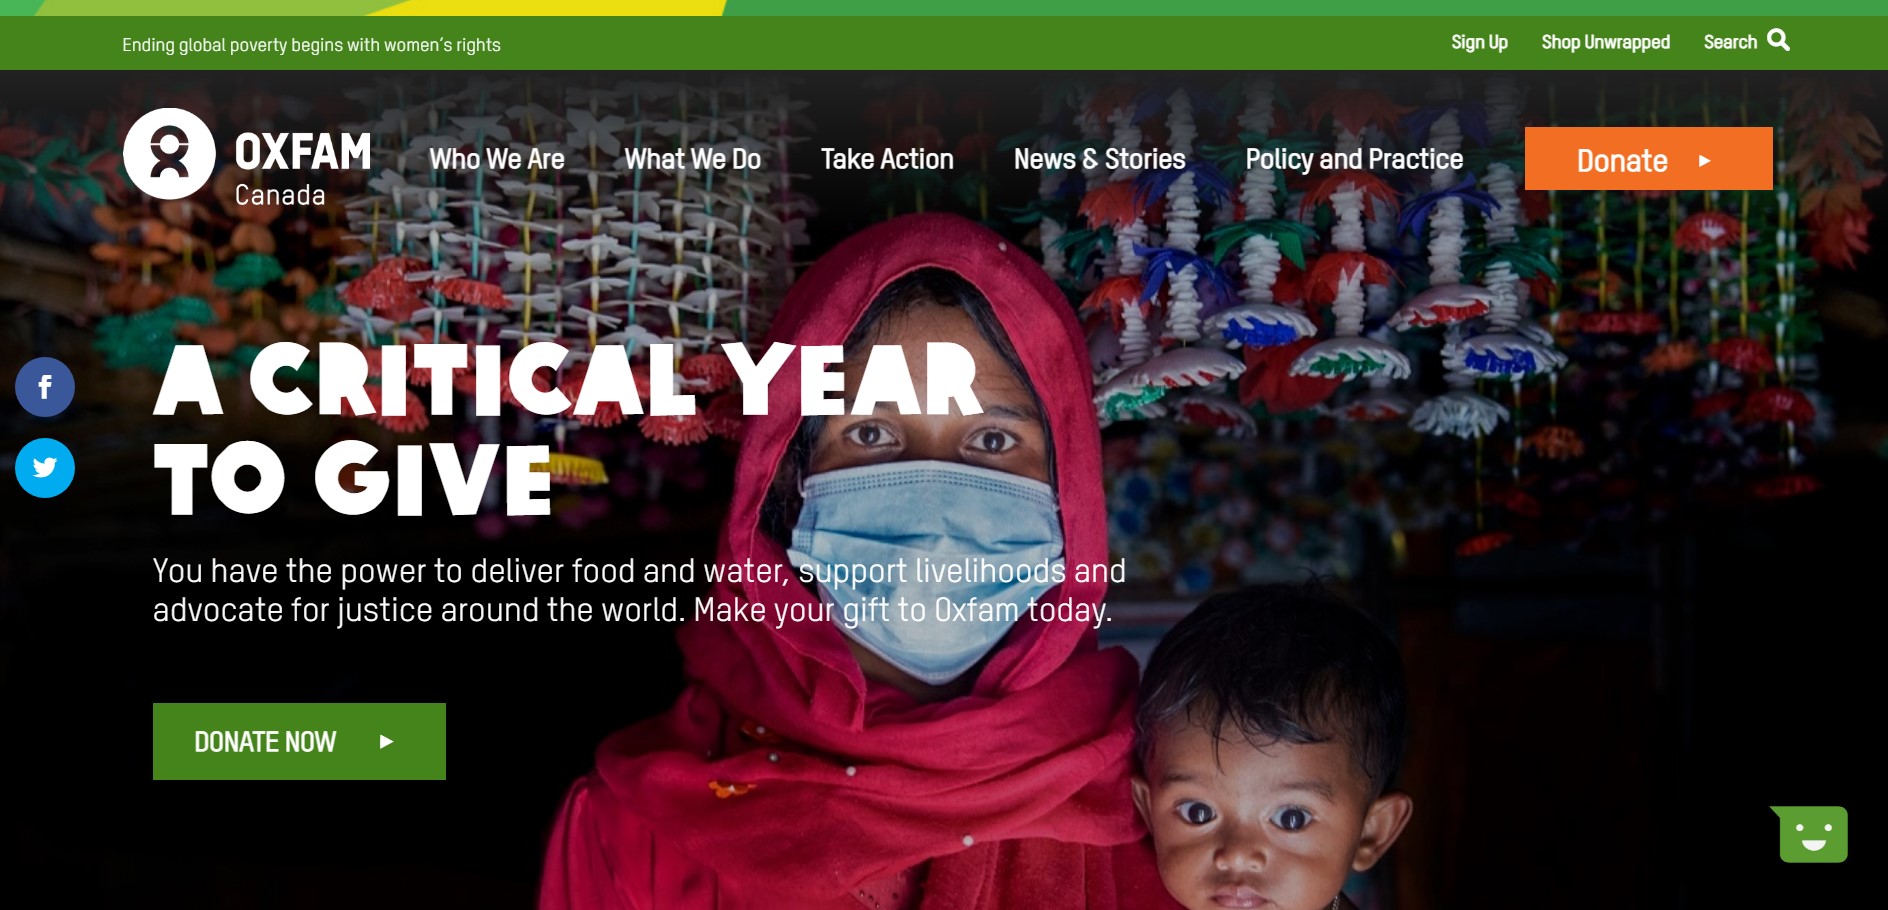 Oxfam Canada has one of our favorite nonprofit websites.